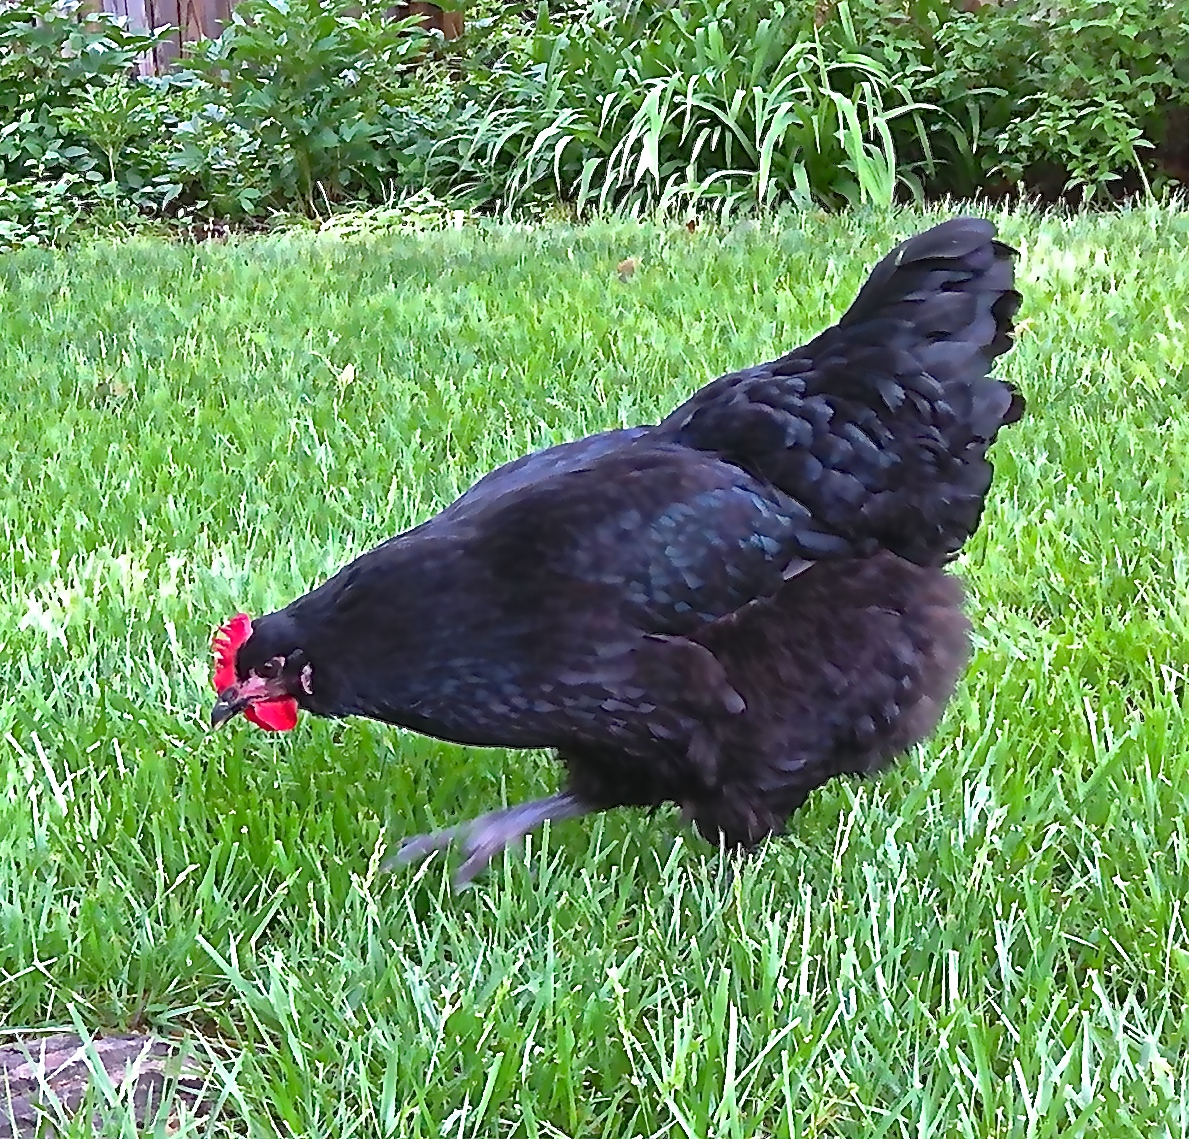 Selma was bought as a "blue orpington" pullet who is a lovely shade of black. The easiest of all the girls to catch, Selma is too large to go anywhere very quickly! She's very quiet, calm, and the #2 to the barred rock.